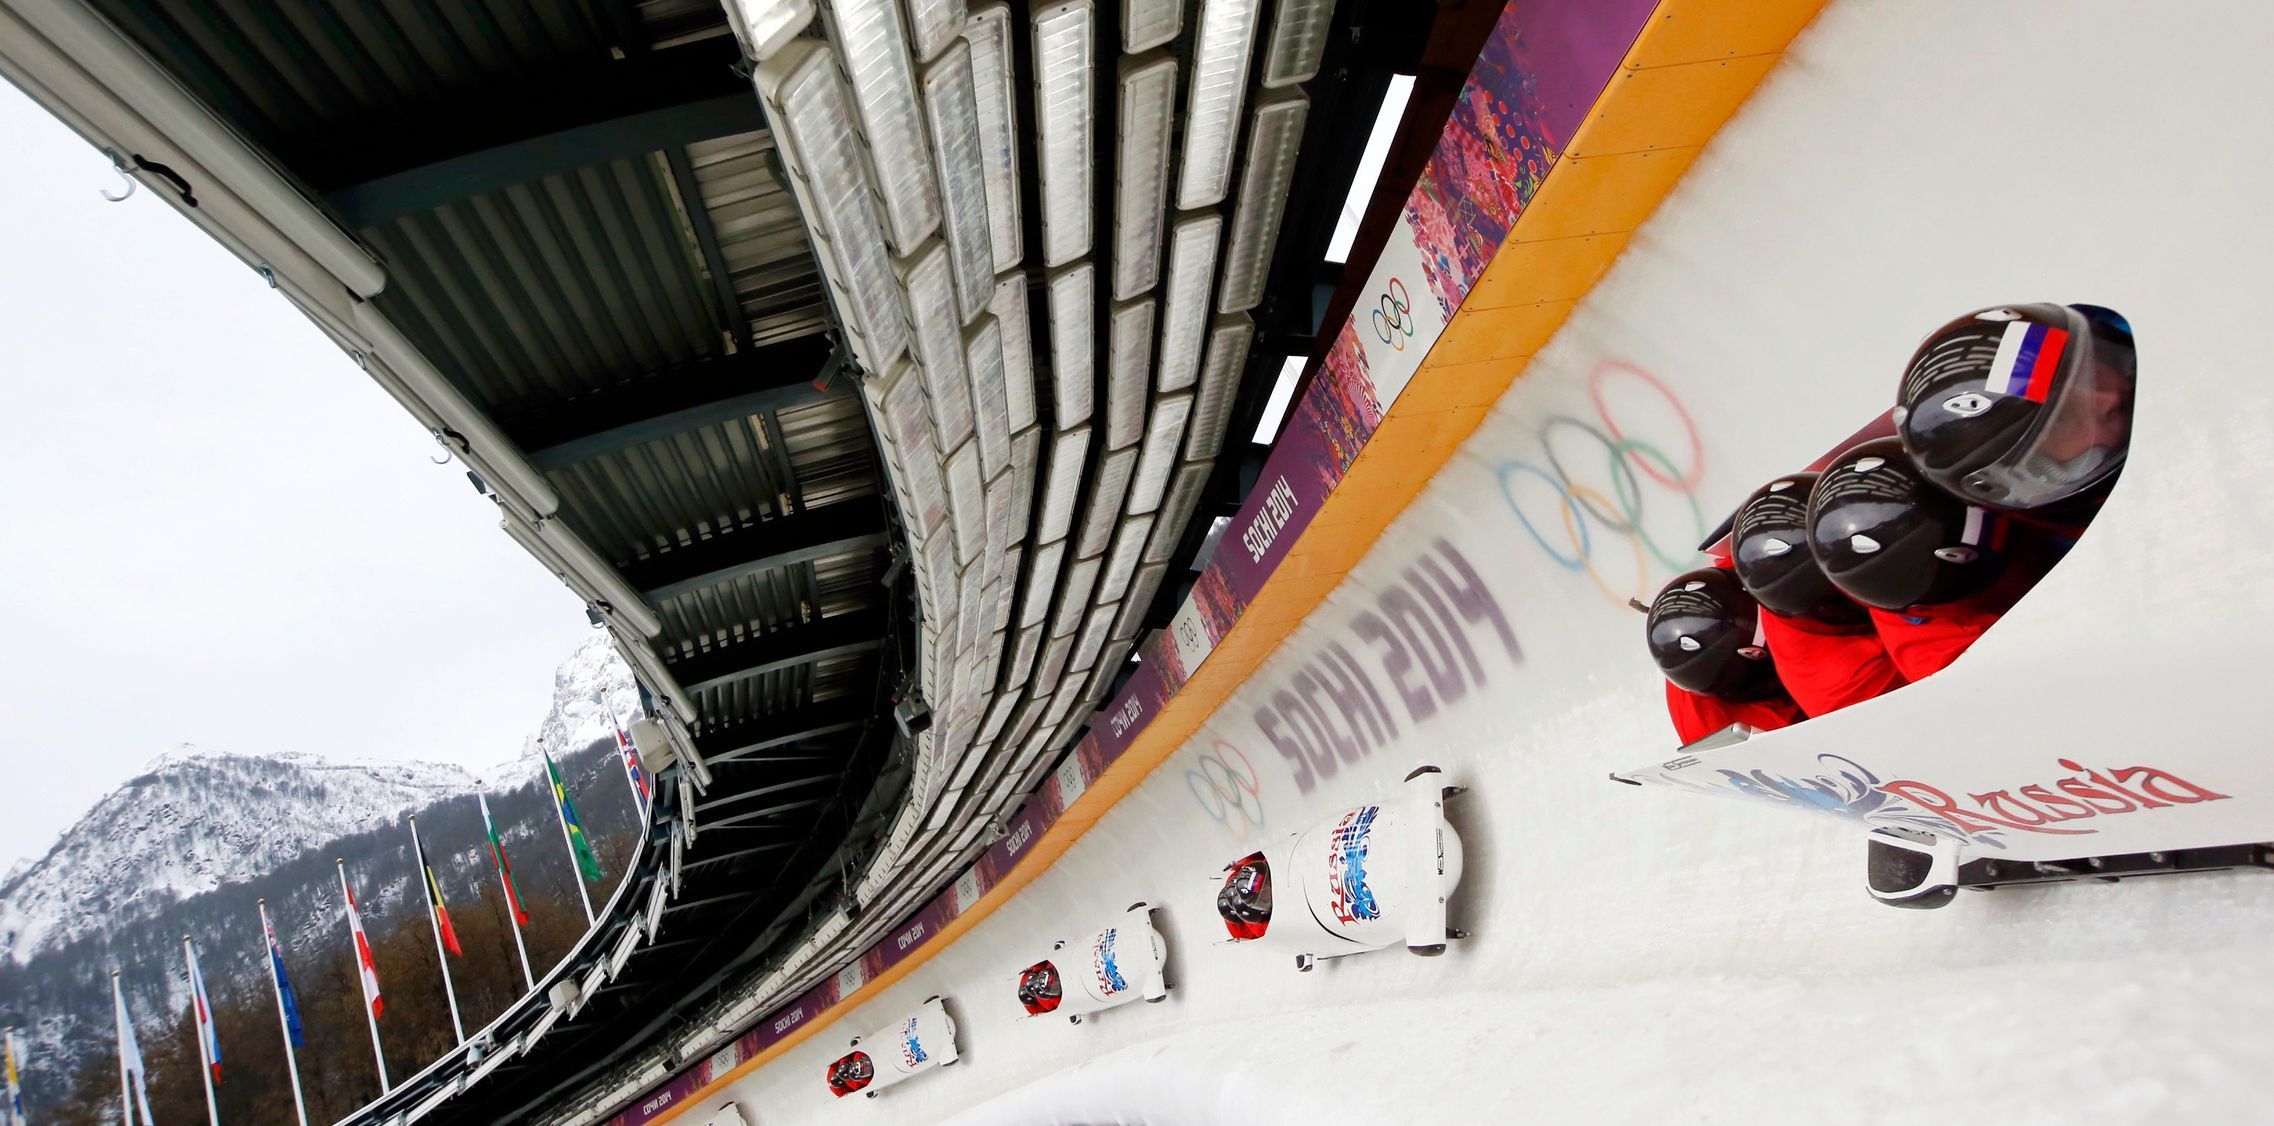 Russia's pilot Zubkov and his teammates speed down the track during a four-man bobsleigh training session during the Sochi 2014 Winter Olympics